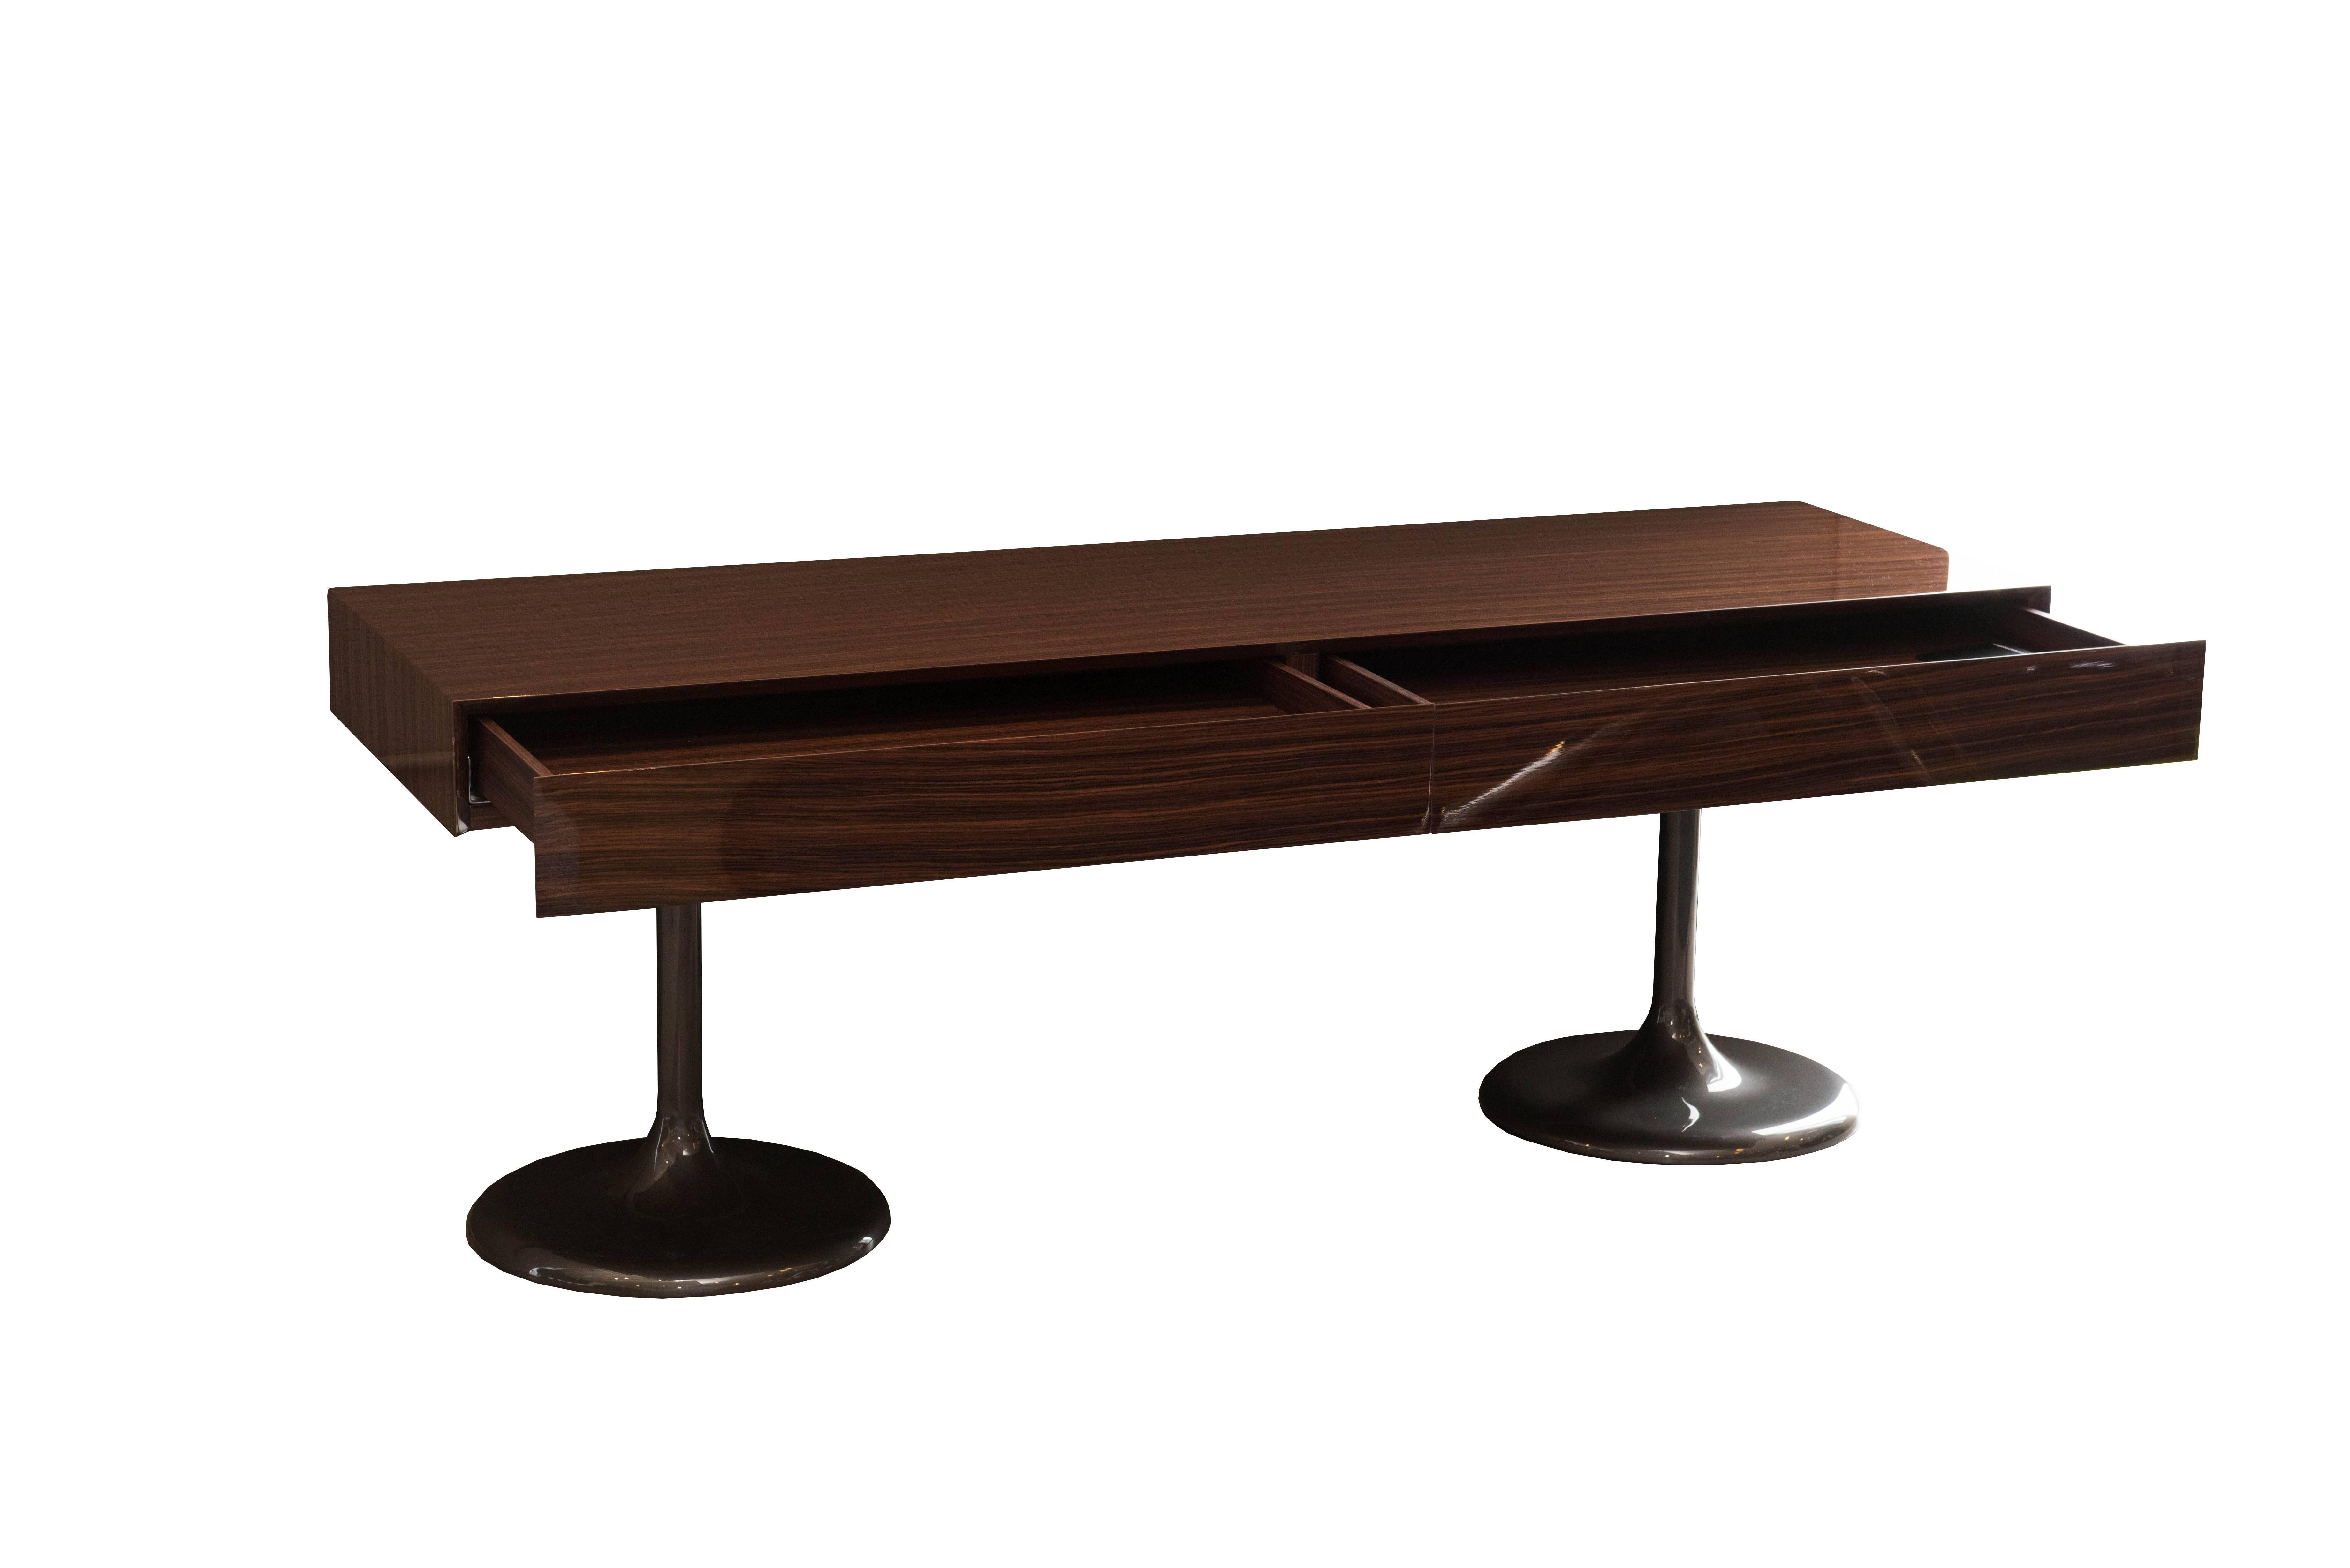 Italian Glossy Walnut Console.

Base: molded structural polyurethane
(BAYDUR® 60) with metal load-bearing
structure and counterweight plate. The
base is available in a glossy Pewter colored
finish.

Top: upper top surface in box-section
MDF